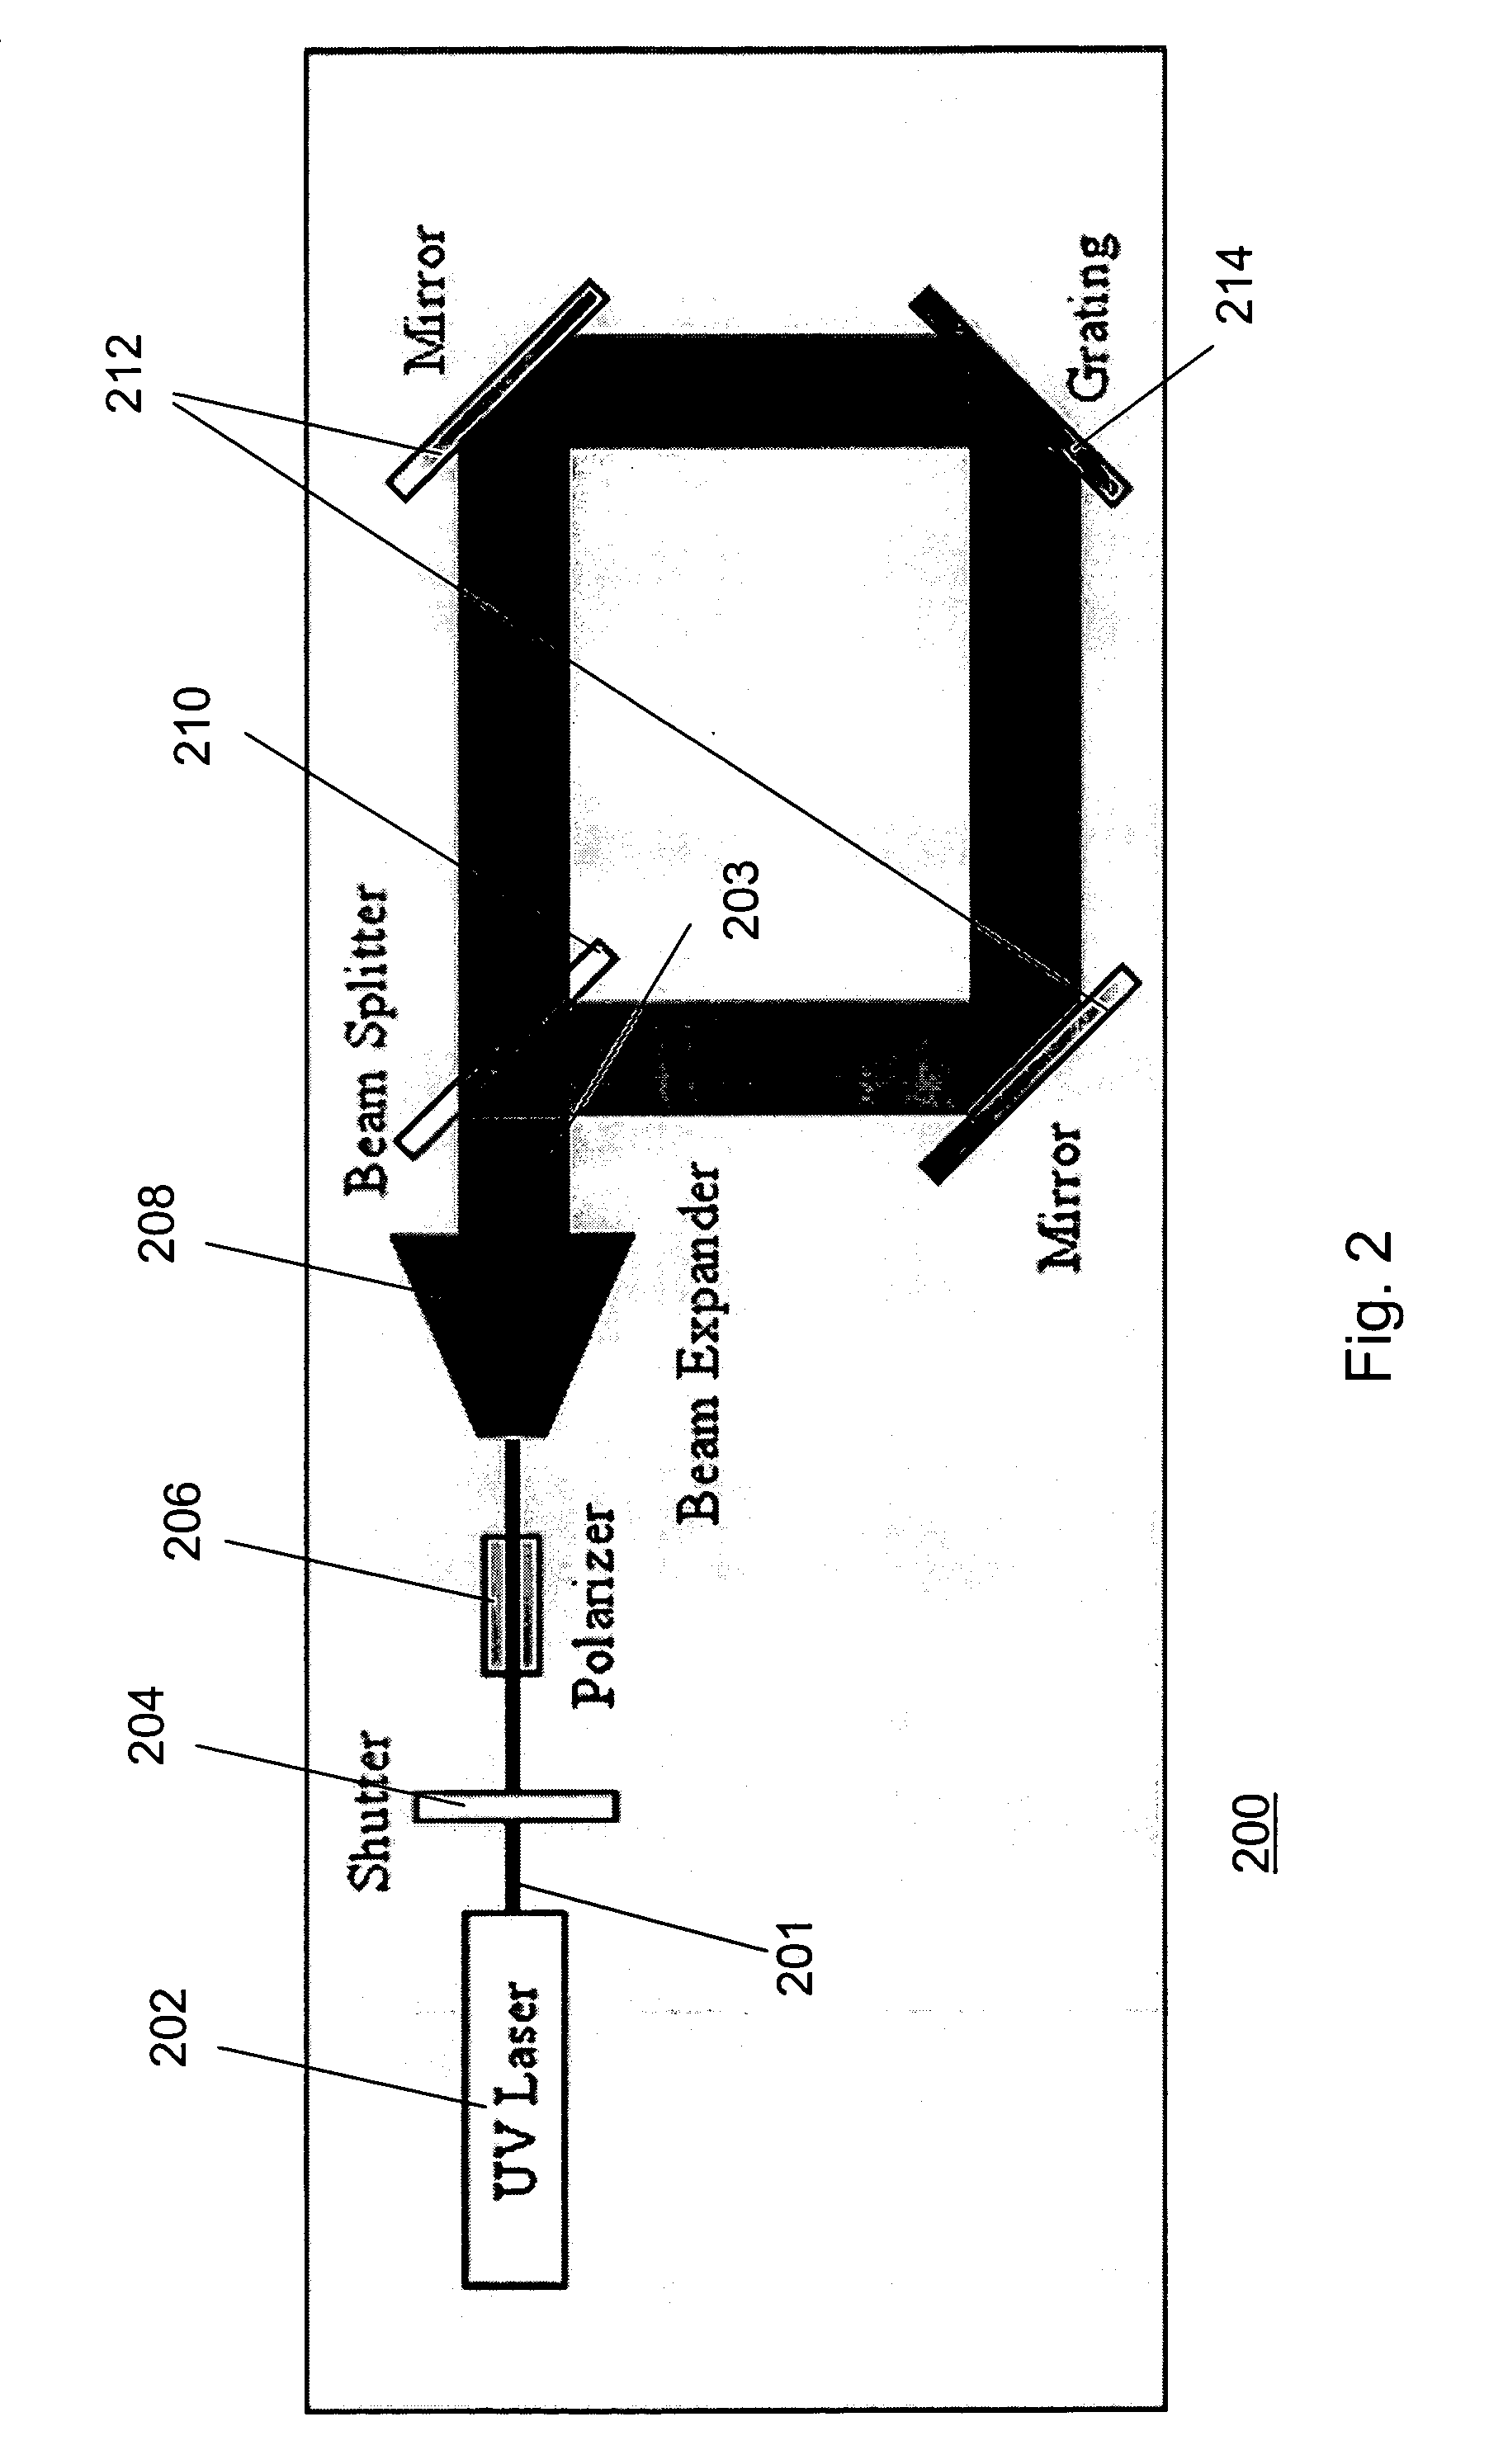 Optical switching device using holographic polymer dispersed liquid crystals